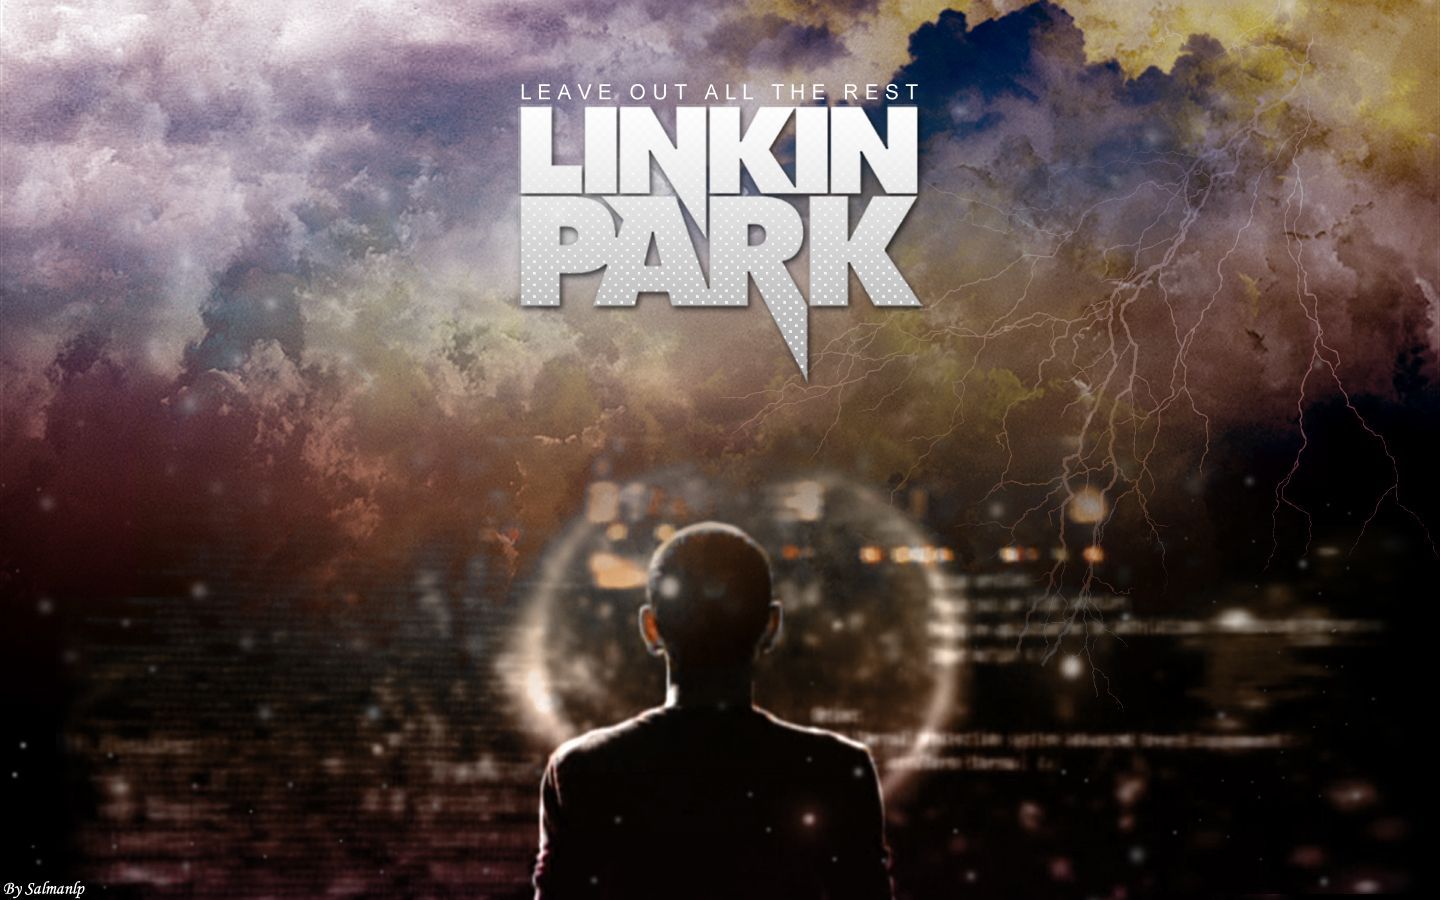 Linkin park leave out all the rest Wallpapers - HD Wallpapers 43146